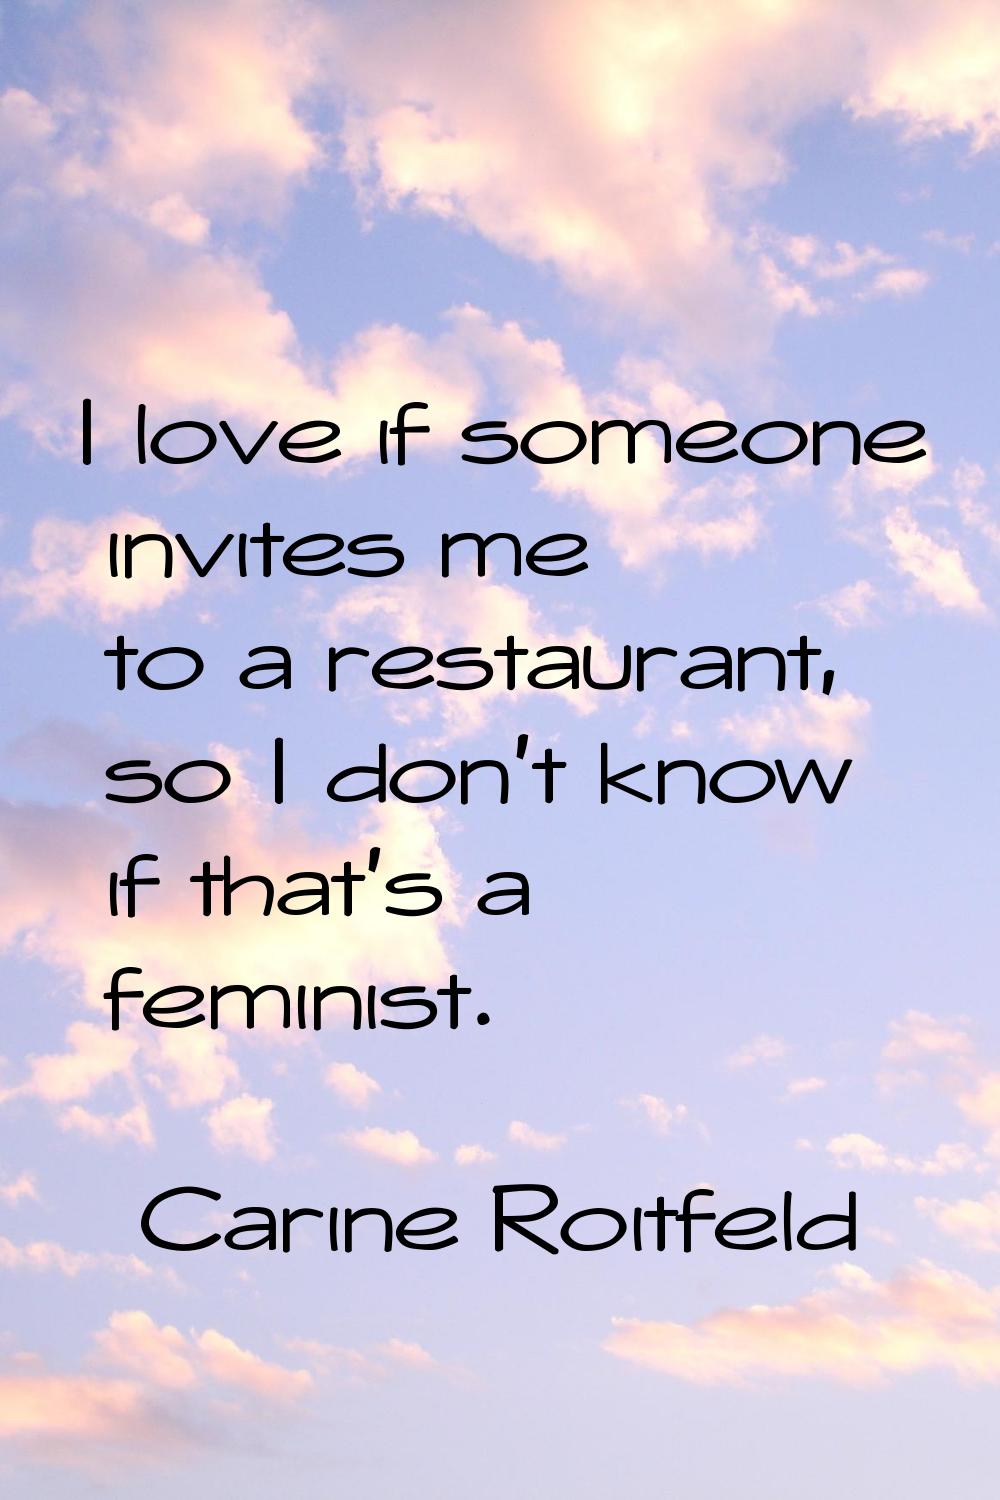 I love if someone invites me to a restaurant, so I don't know if that's a feminist.